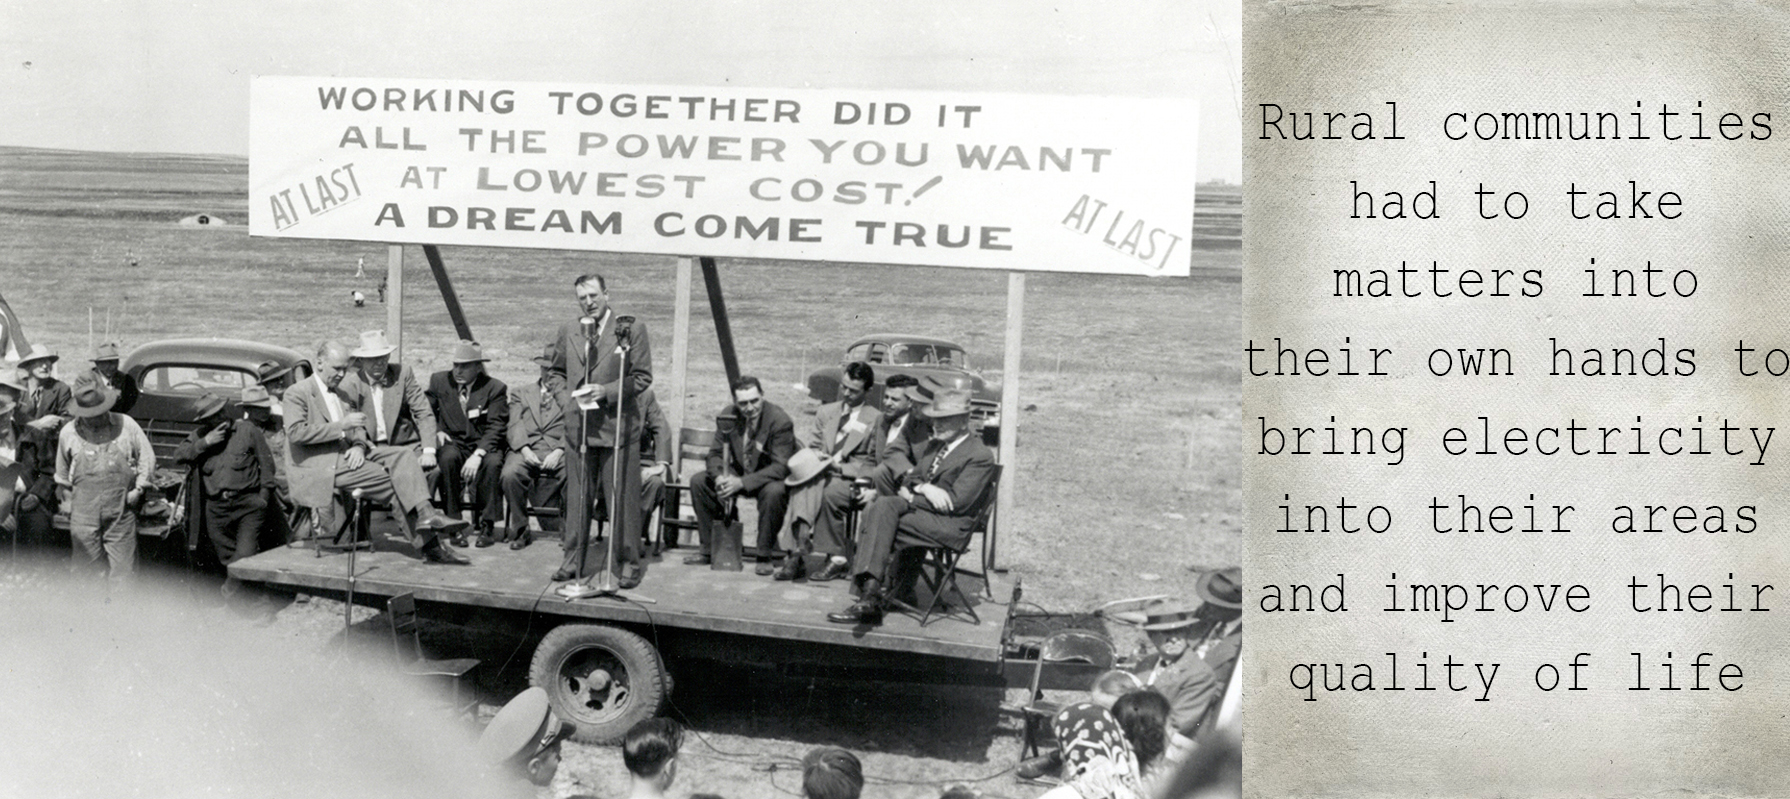 Rural communities had to take matters into their own hands to bring electricity into their areas and improve their quality of life; image shows group of men in suits sitting on platform, with a man standing in front of them at a microphone and a sign behind them, reading "Working together did it, all the power you want at lowest cost! At last, a dream come true."